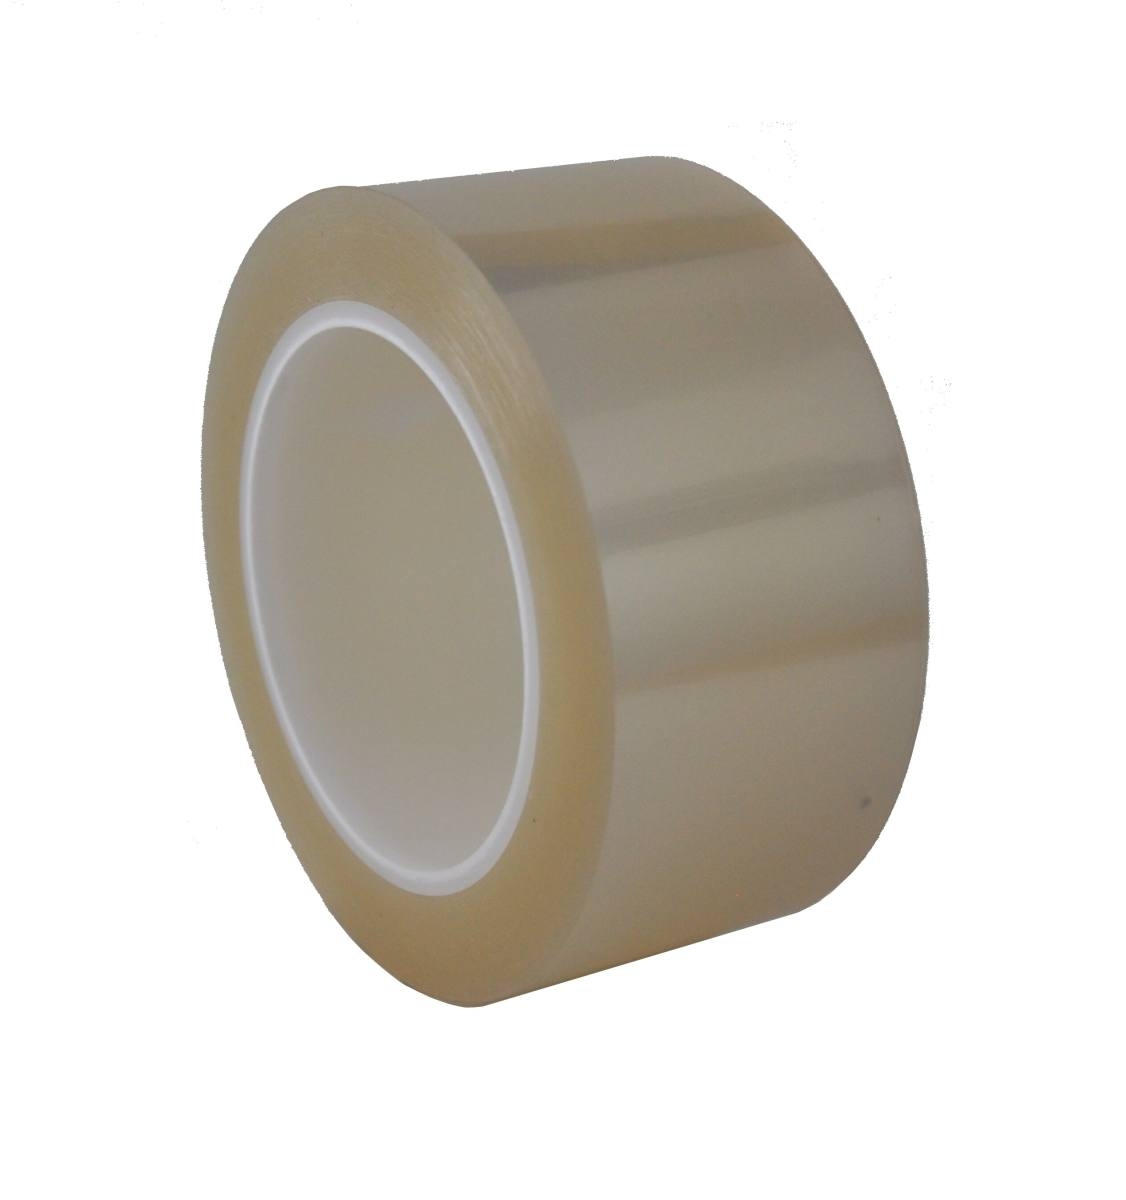 SKS fluorosilicone film, polyester film 0.075mm, 100mmx100m, coated on one side with fluorosilicone, transparent